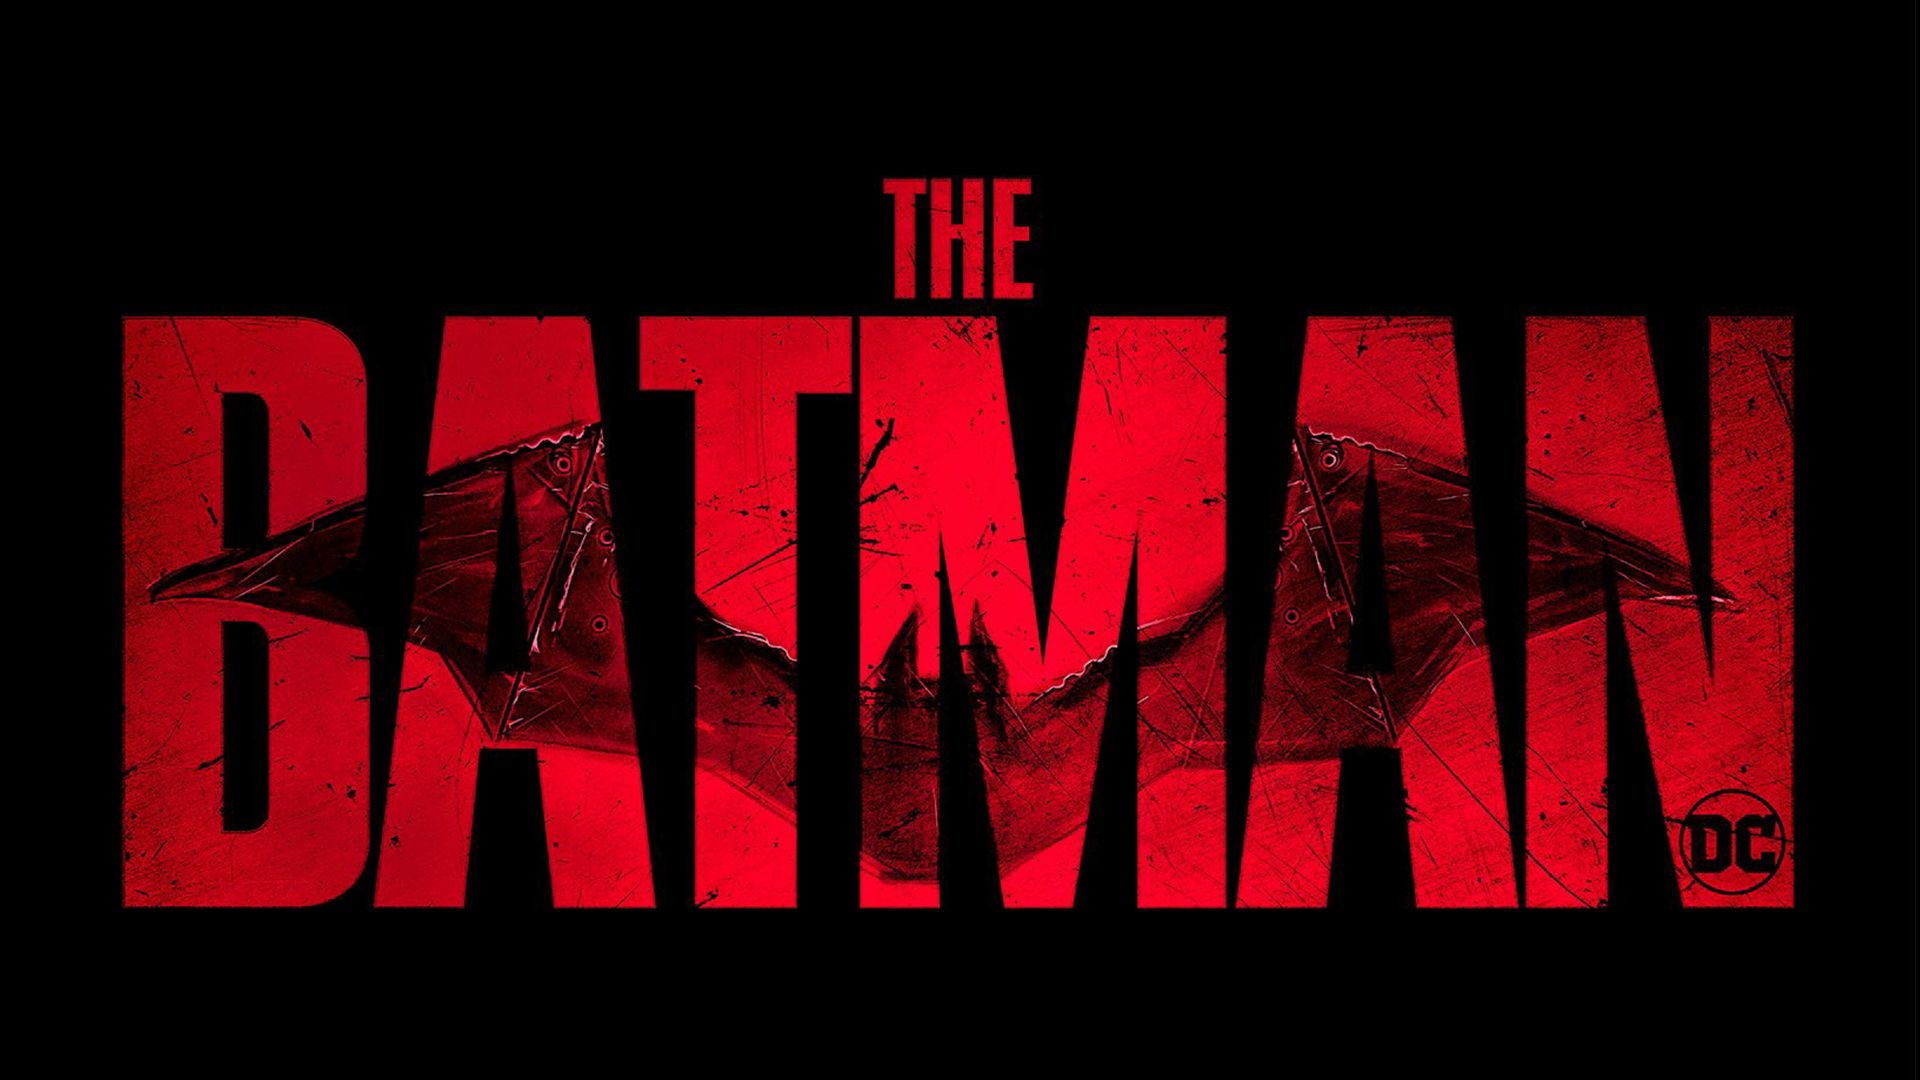 Brand new The Batman logo will make you see red